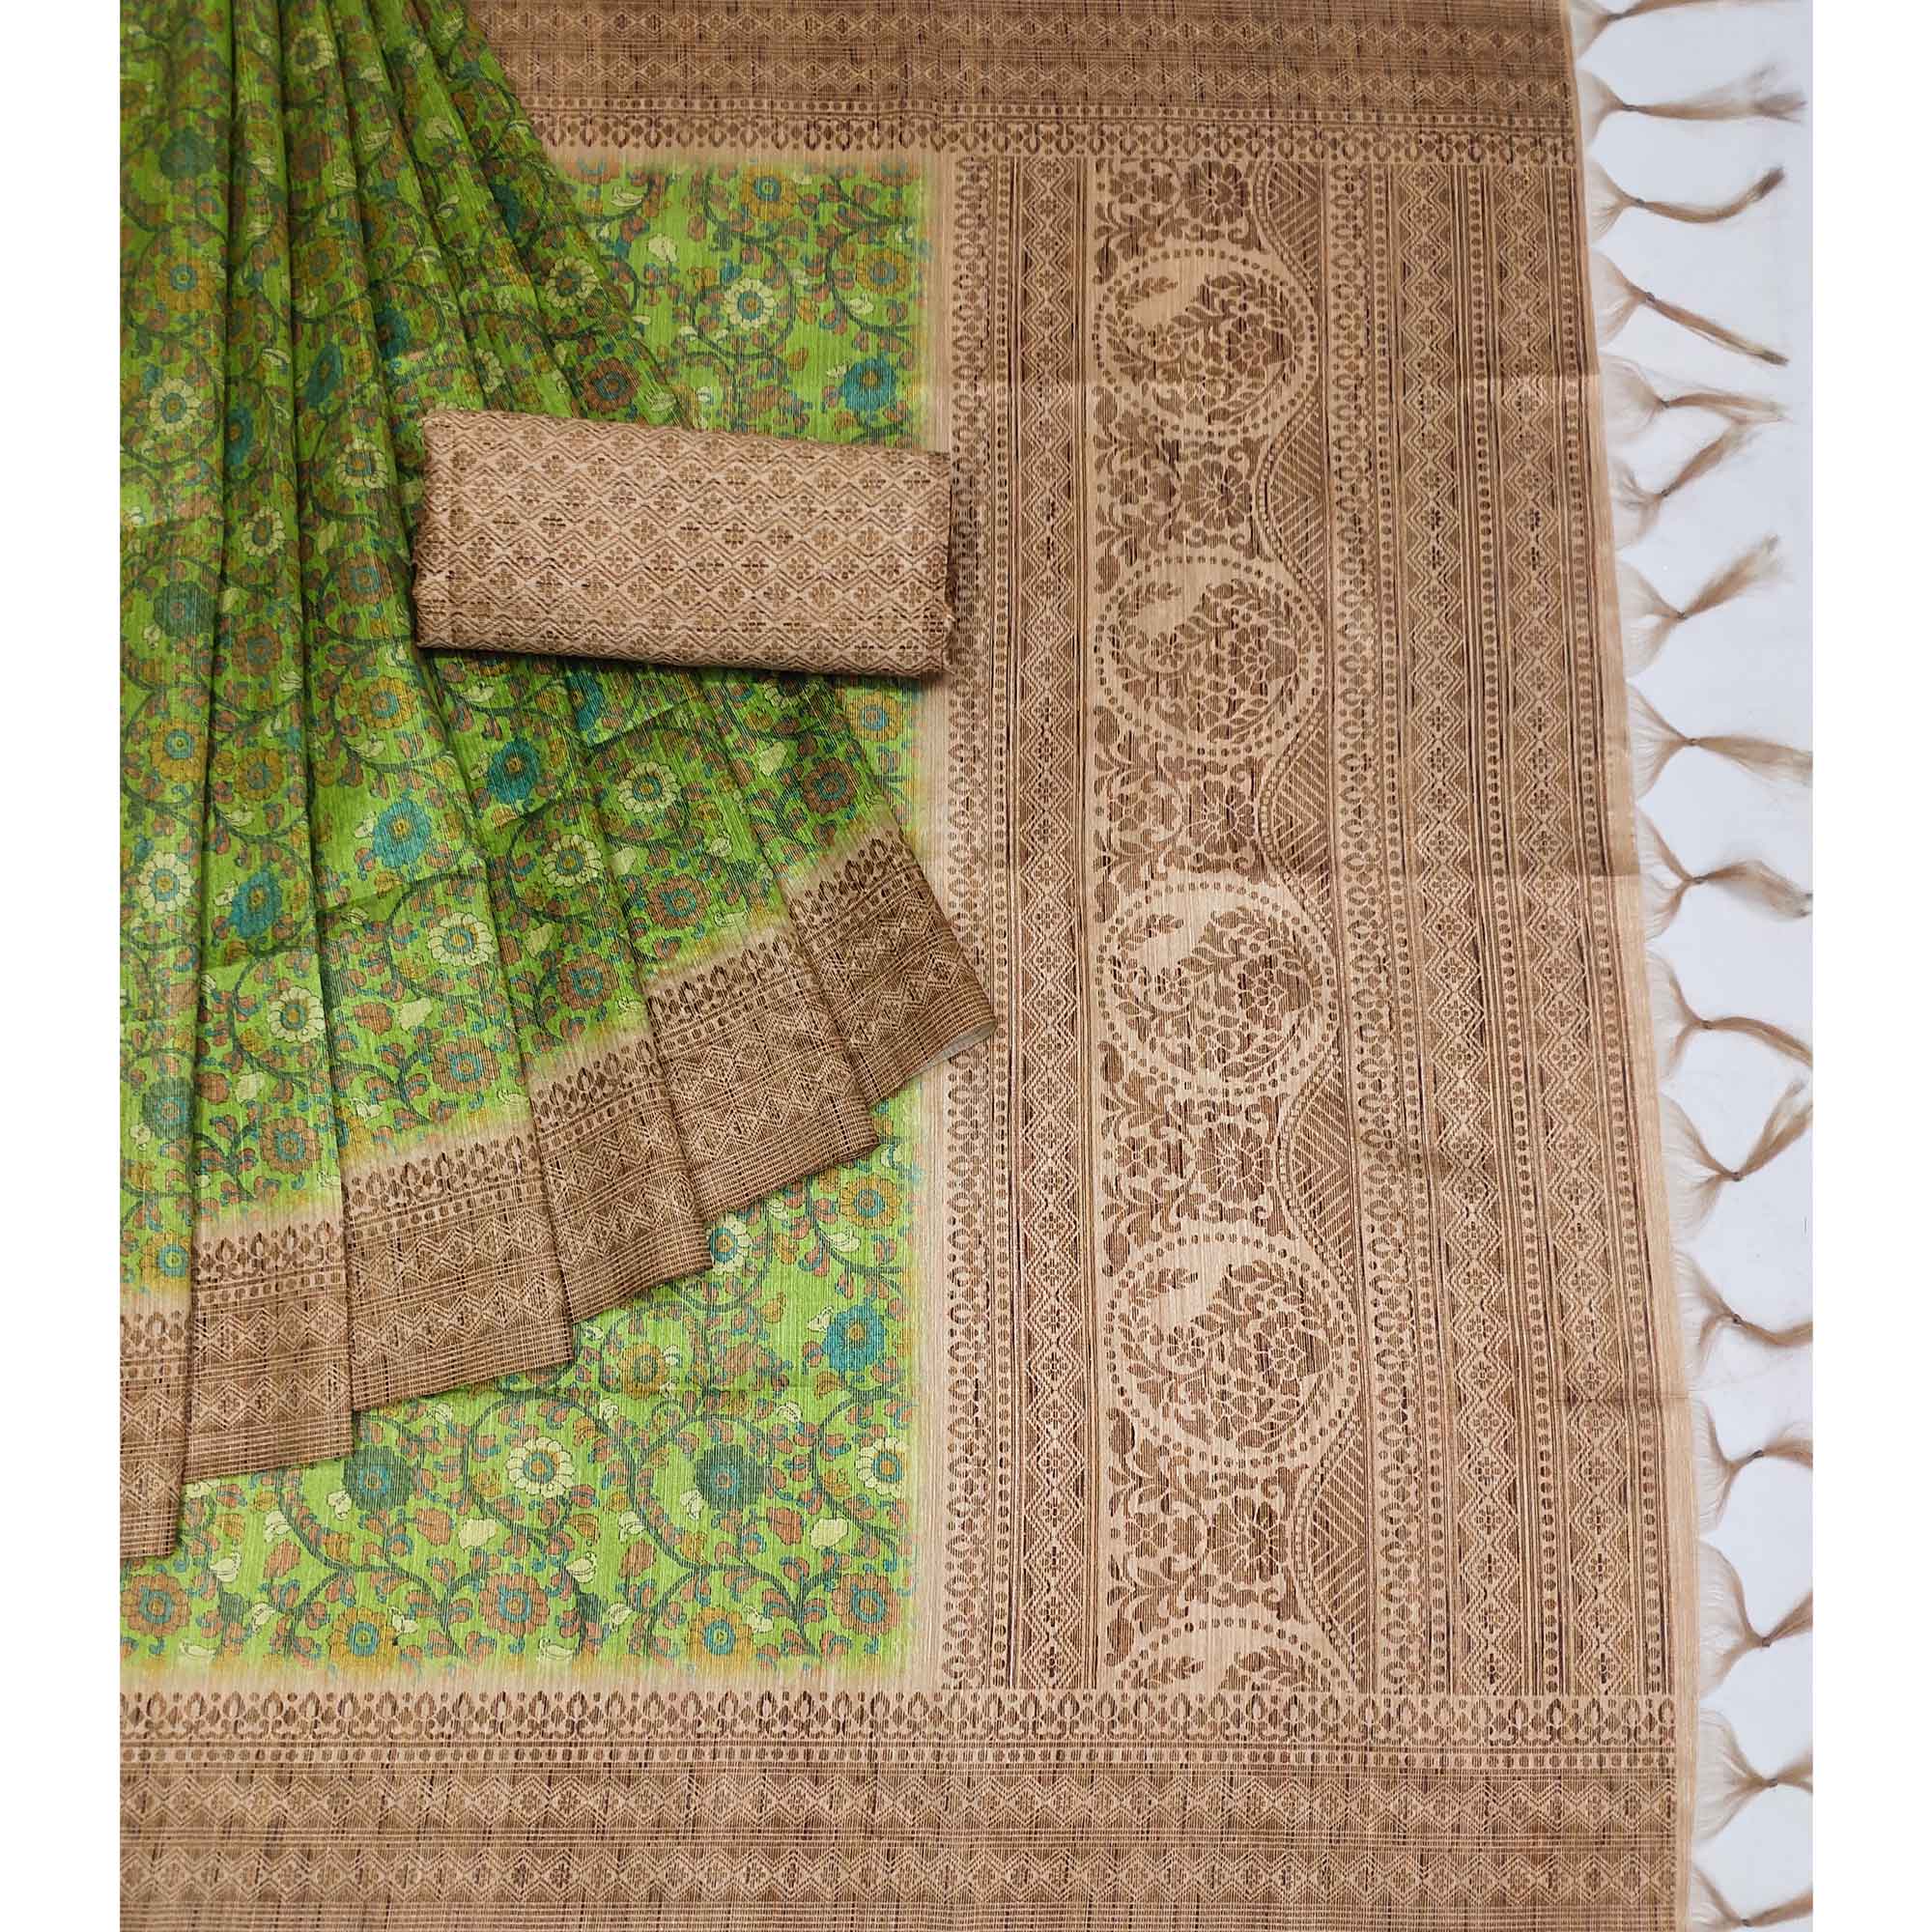 Green Floral Printed Cotton Silk Saree With Tassels